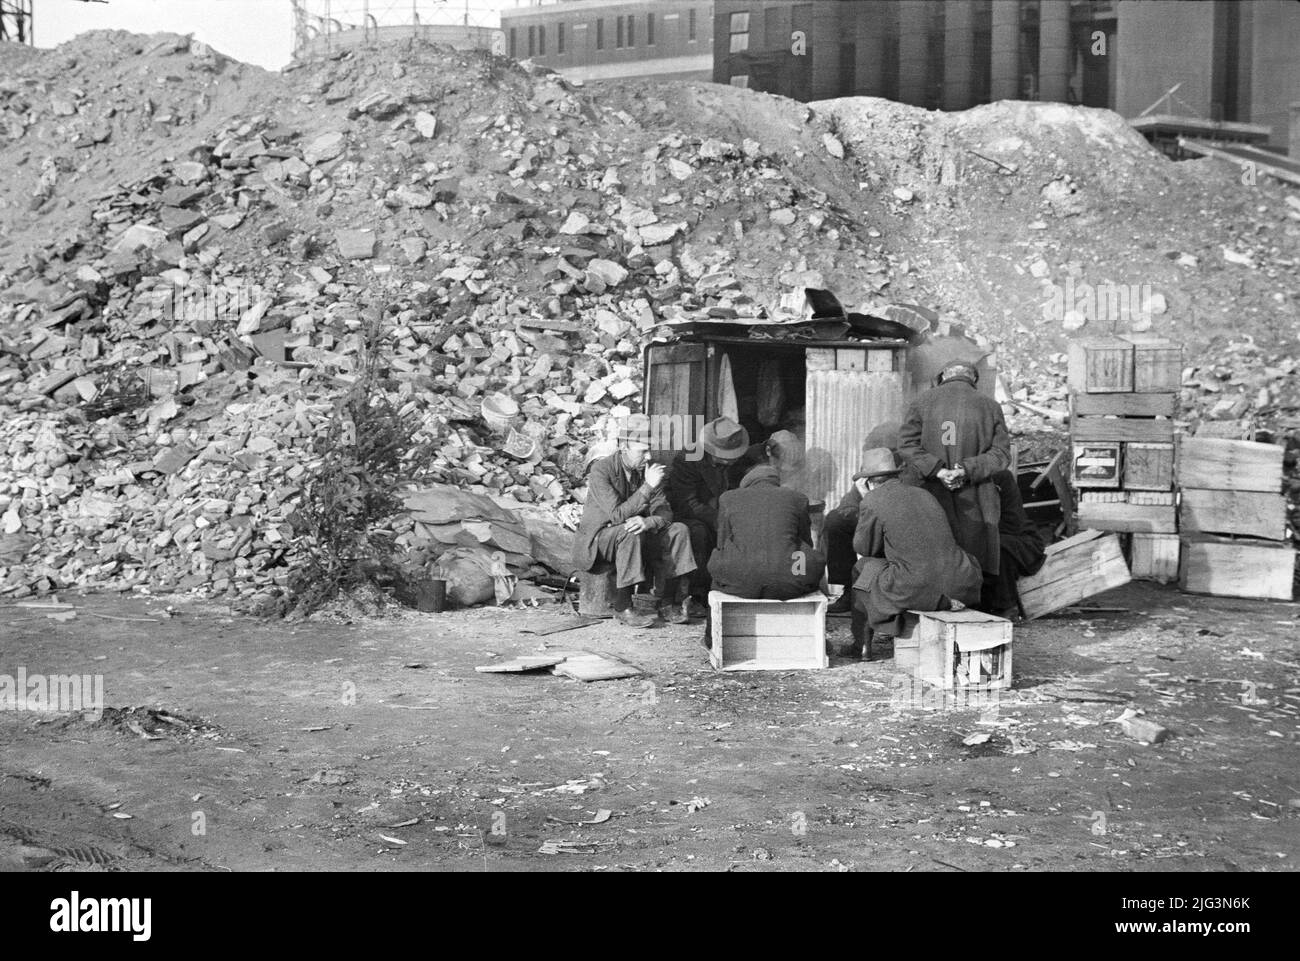 Unemployed Workers in front of Shack next to pile of rubble, East 12th Street, New York City, New York, USA, Russell Lee, U.S. Office of War Information/U.S. Farm Security Administration, January 1938 Stock Photo